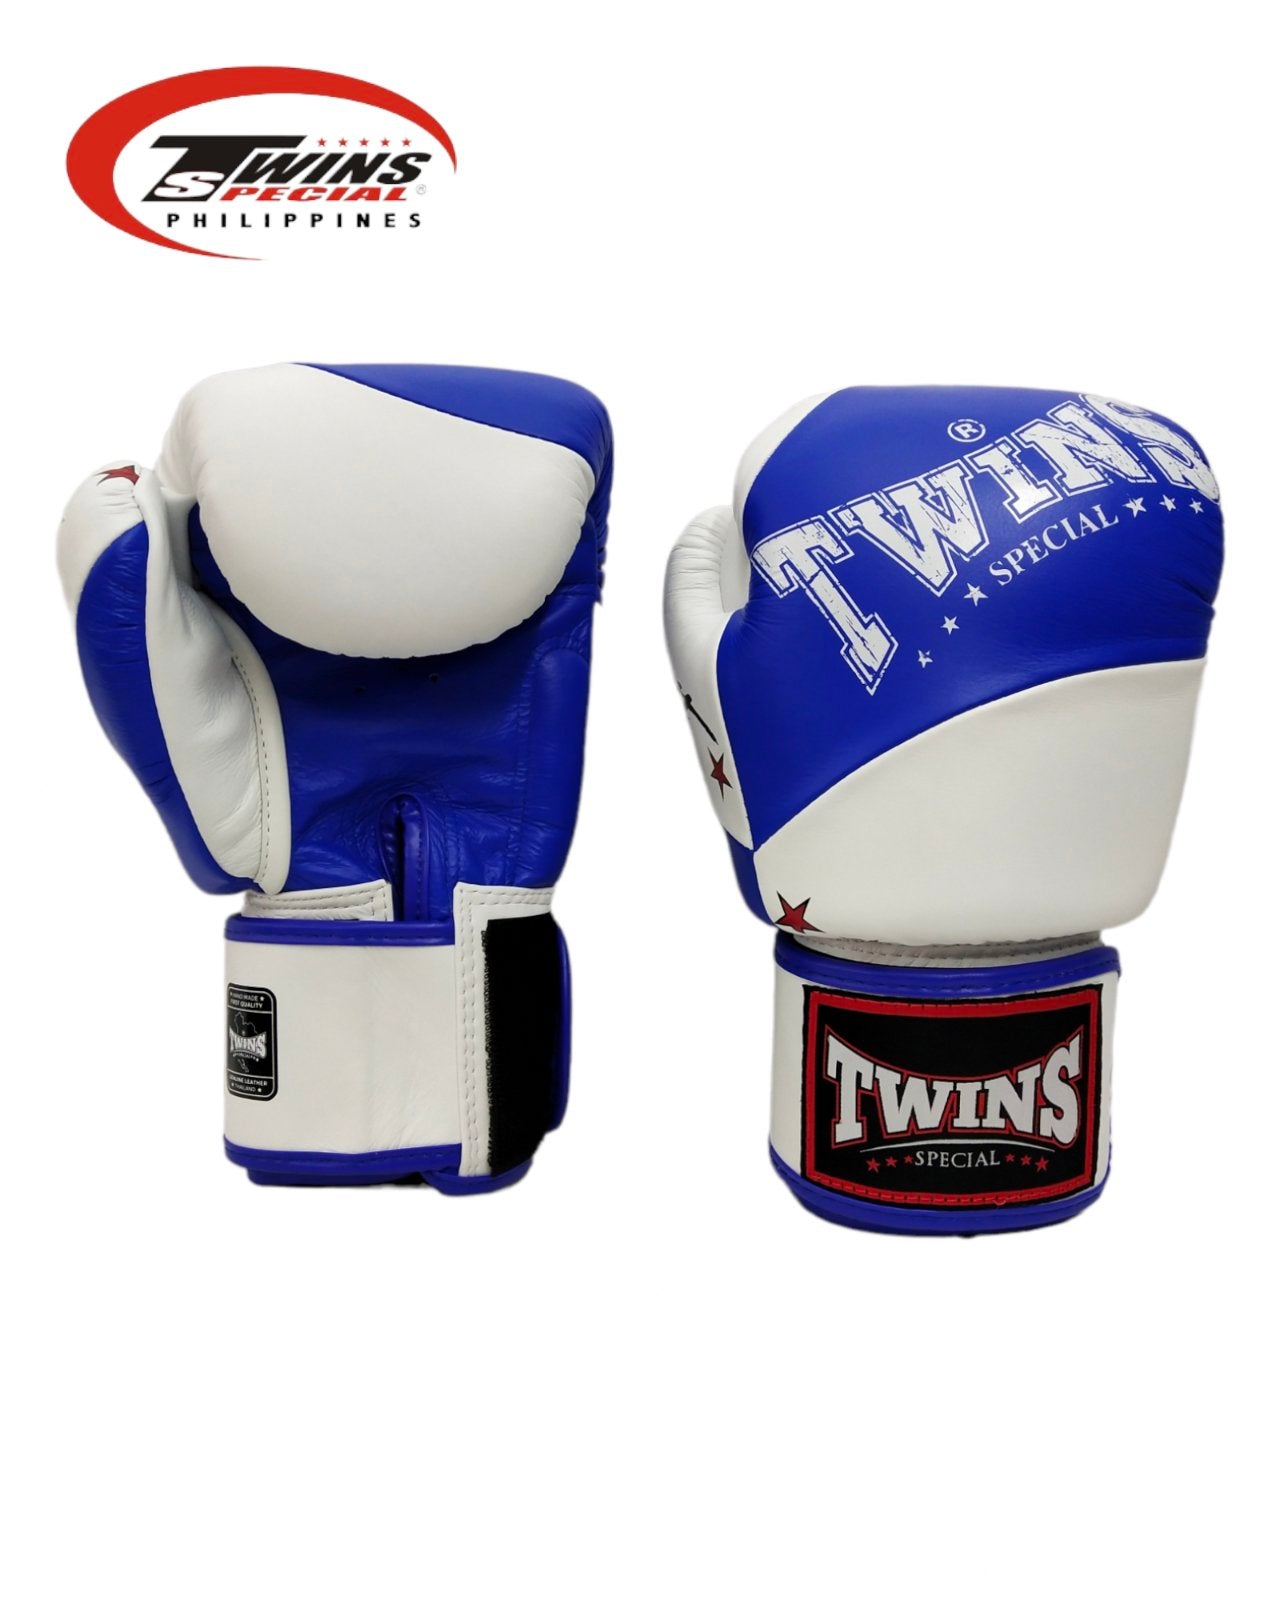 TWINS SPECIAL Fancy  Boxing Gloves Spirit [Blue/White]